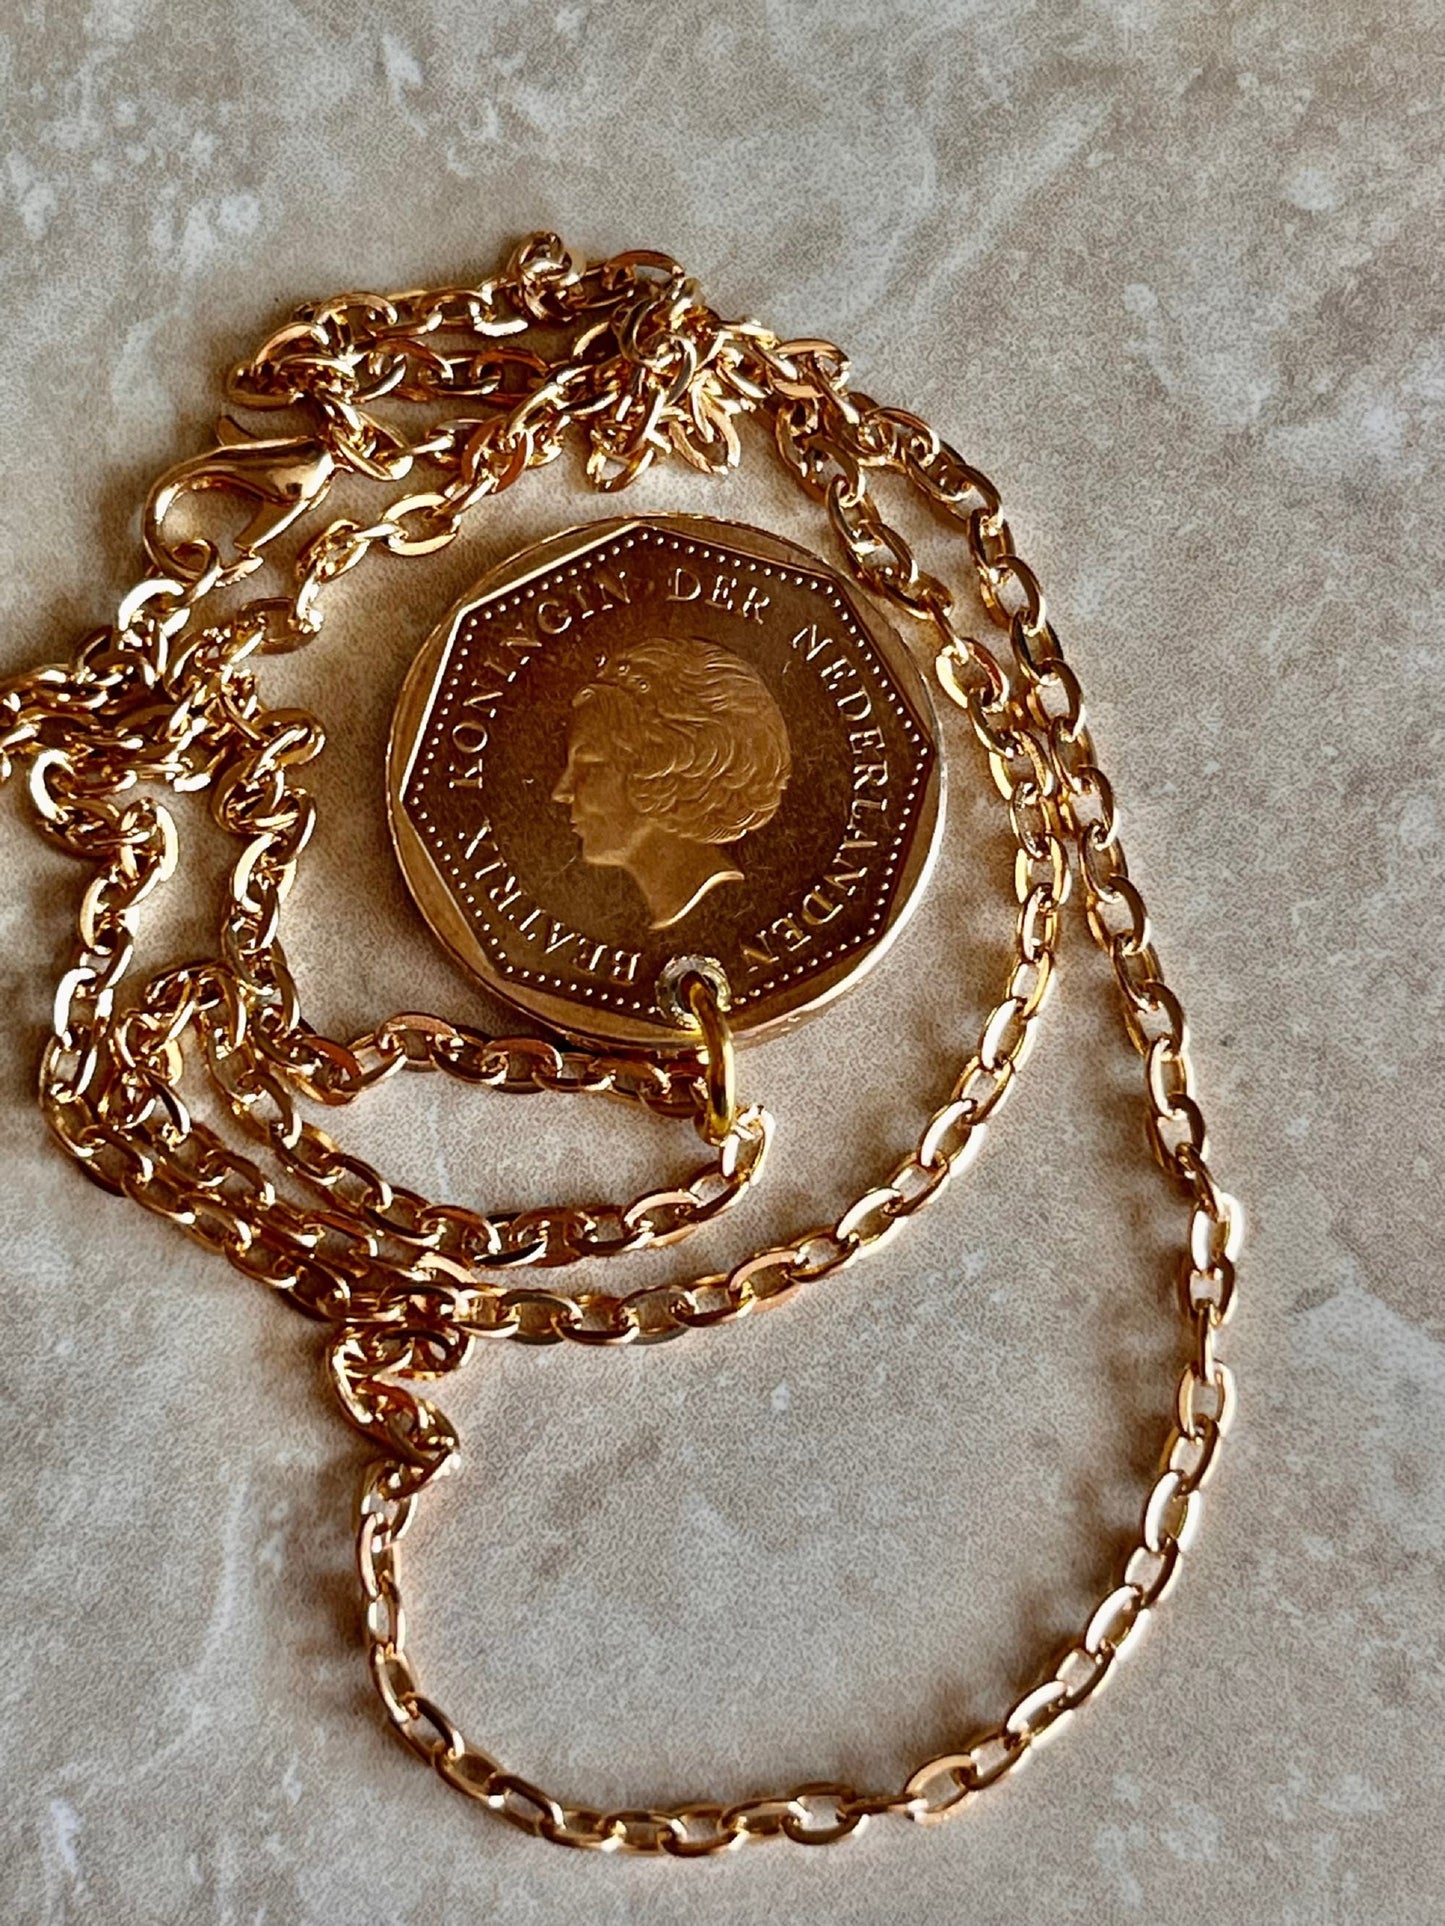 Netherland Coin Pendant Antilles 5 Gulden Queen Juliana Necklace Jewelry Gift For Friend Coin Charm Gift For Him, Her, World Coins Collector